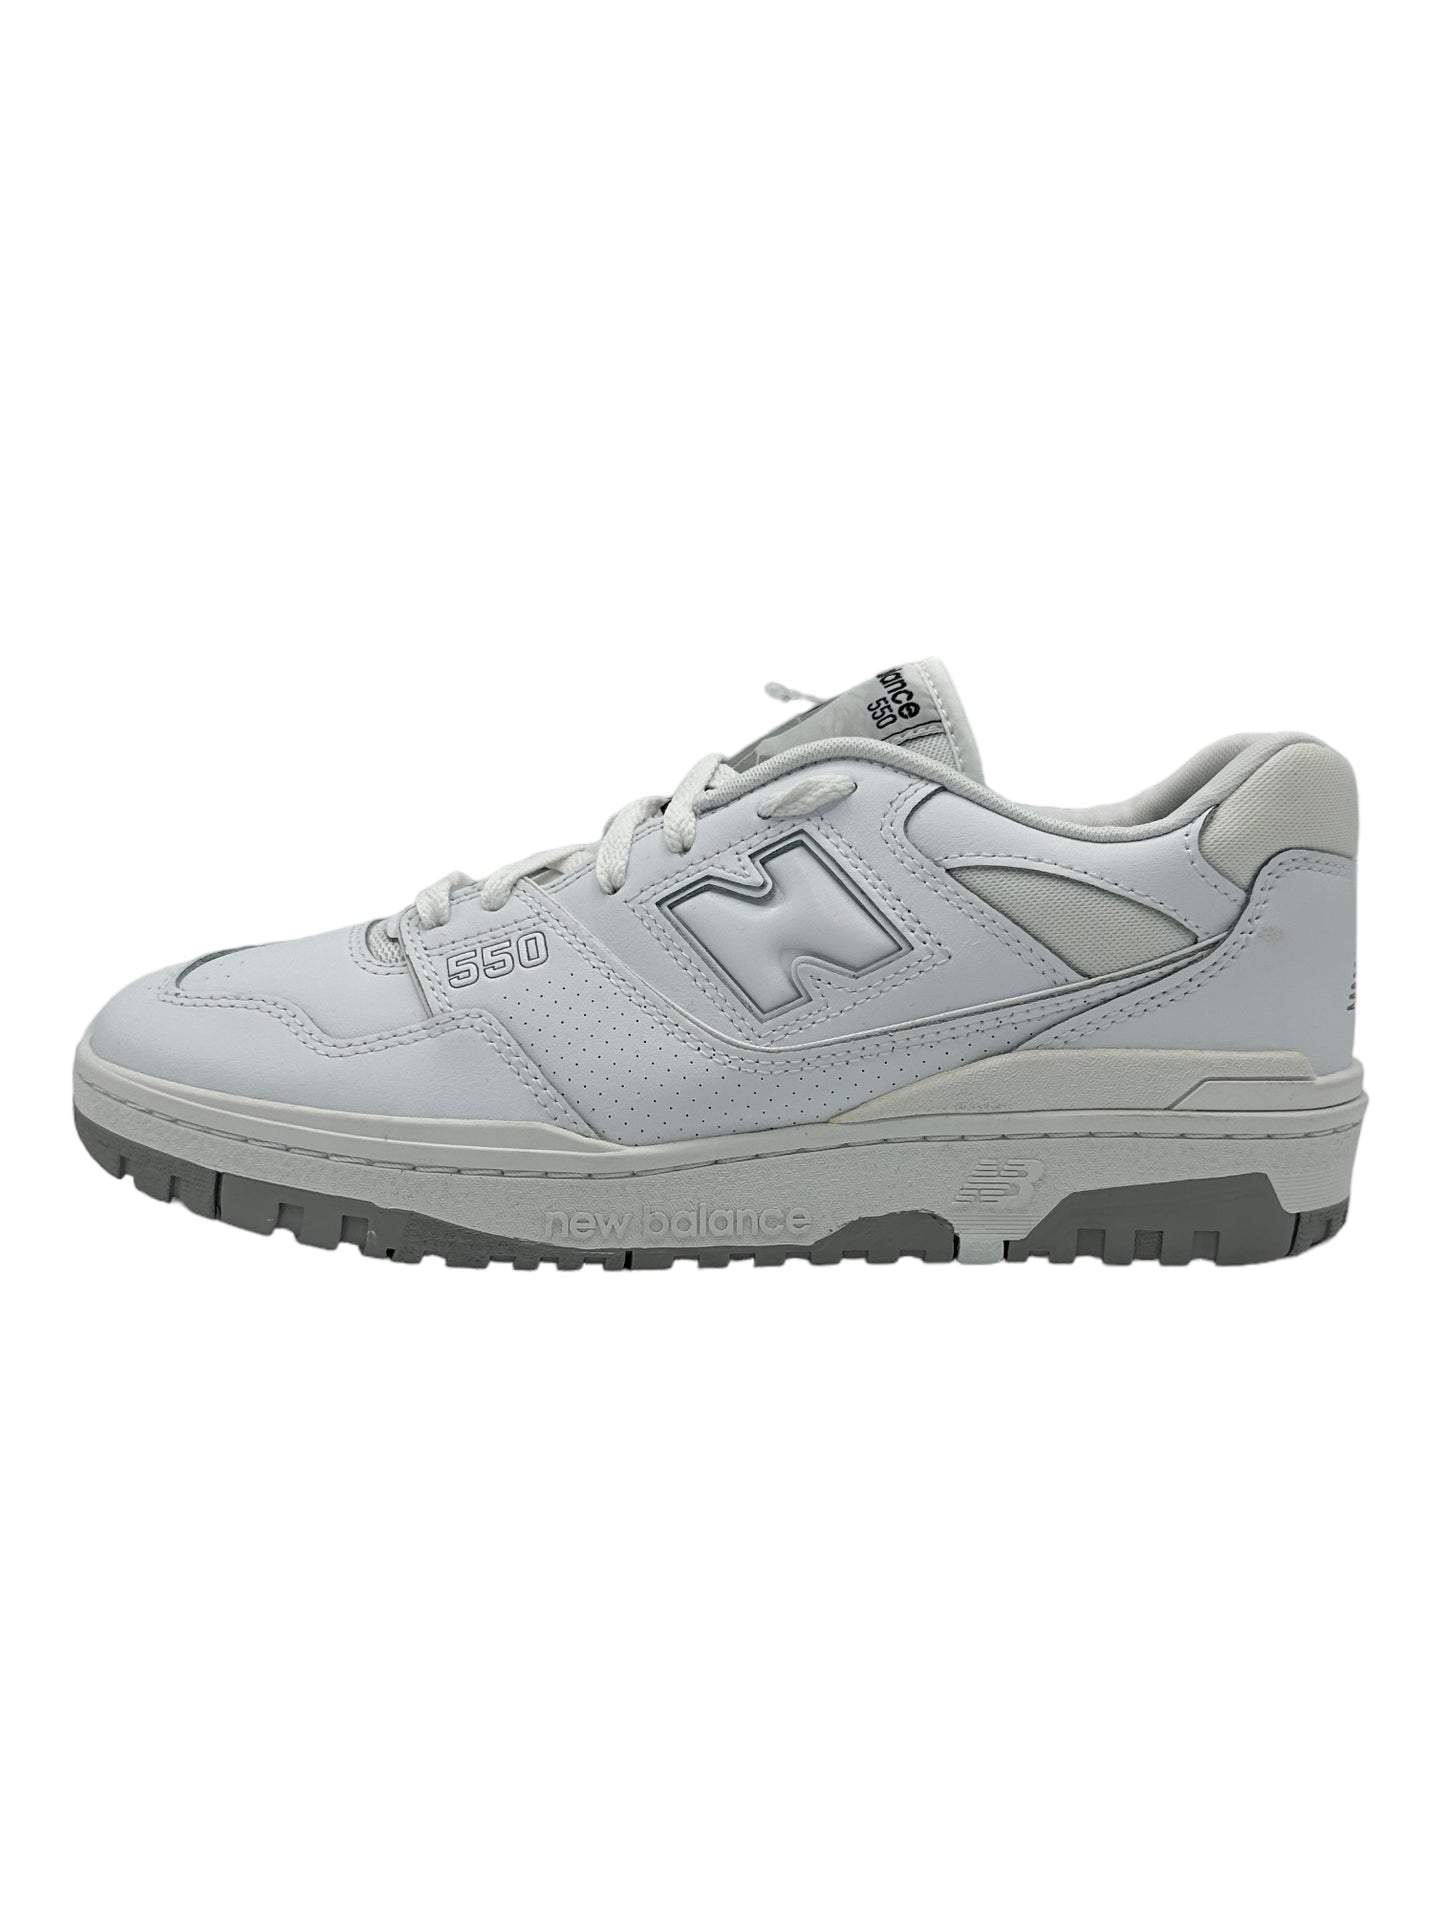 New Balance 550 White/Grey Sneakers - Genuine Design Luxury Consignment for Men. New & Pre-Owned Clothing, Shoes, & Accessories. Calgary, Canada